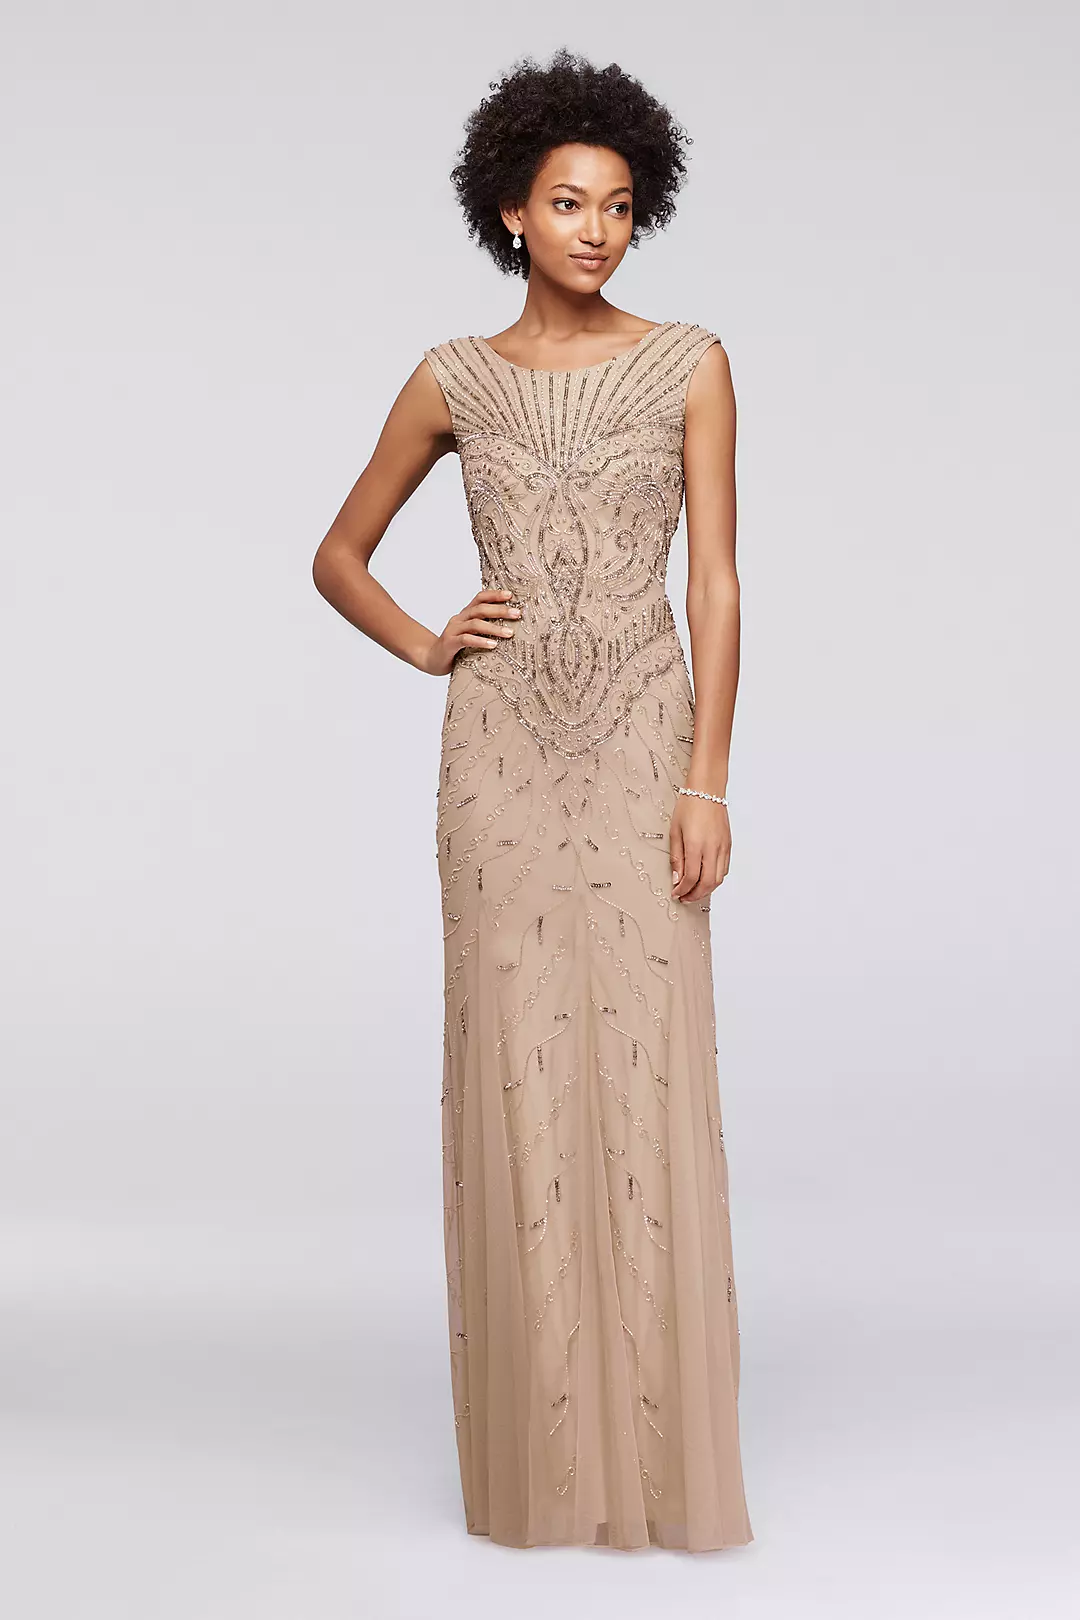 Long Beaded Art Deco Dress with Cap Sleeves Image